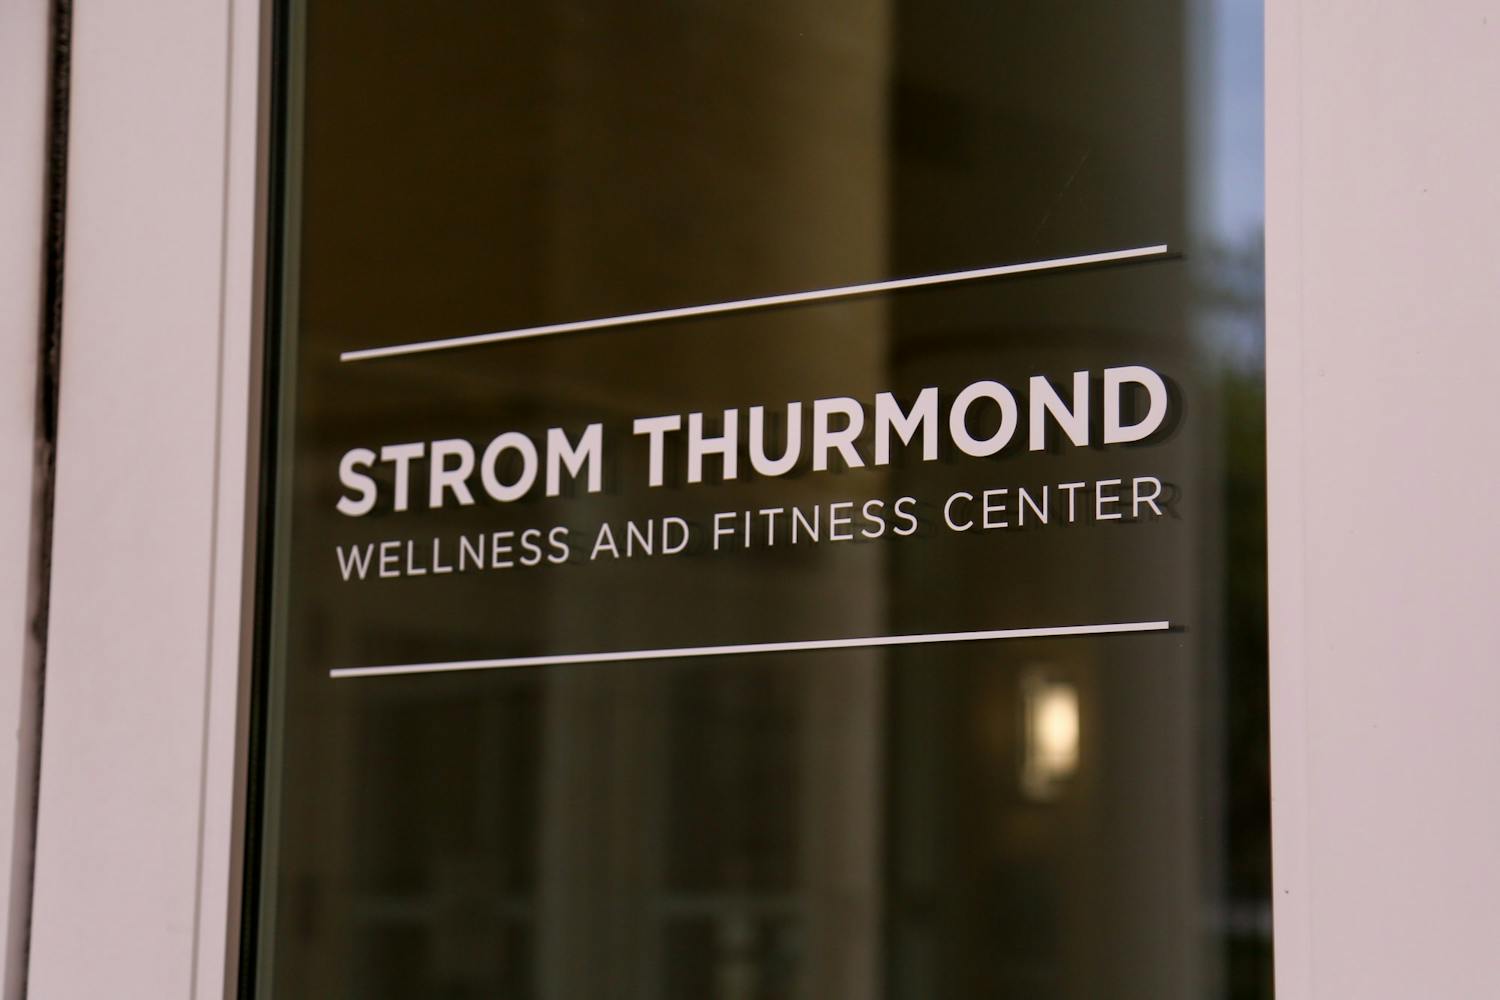 The entrance of Strom Thurmond Wellness and Fitness Center. The facility serves faculty, staff and students of the University of South Carolina.